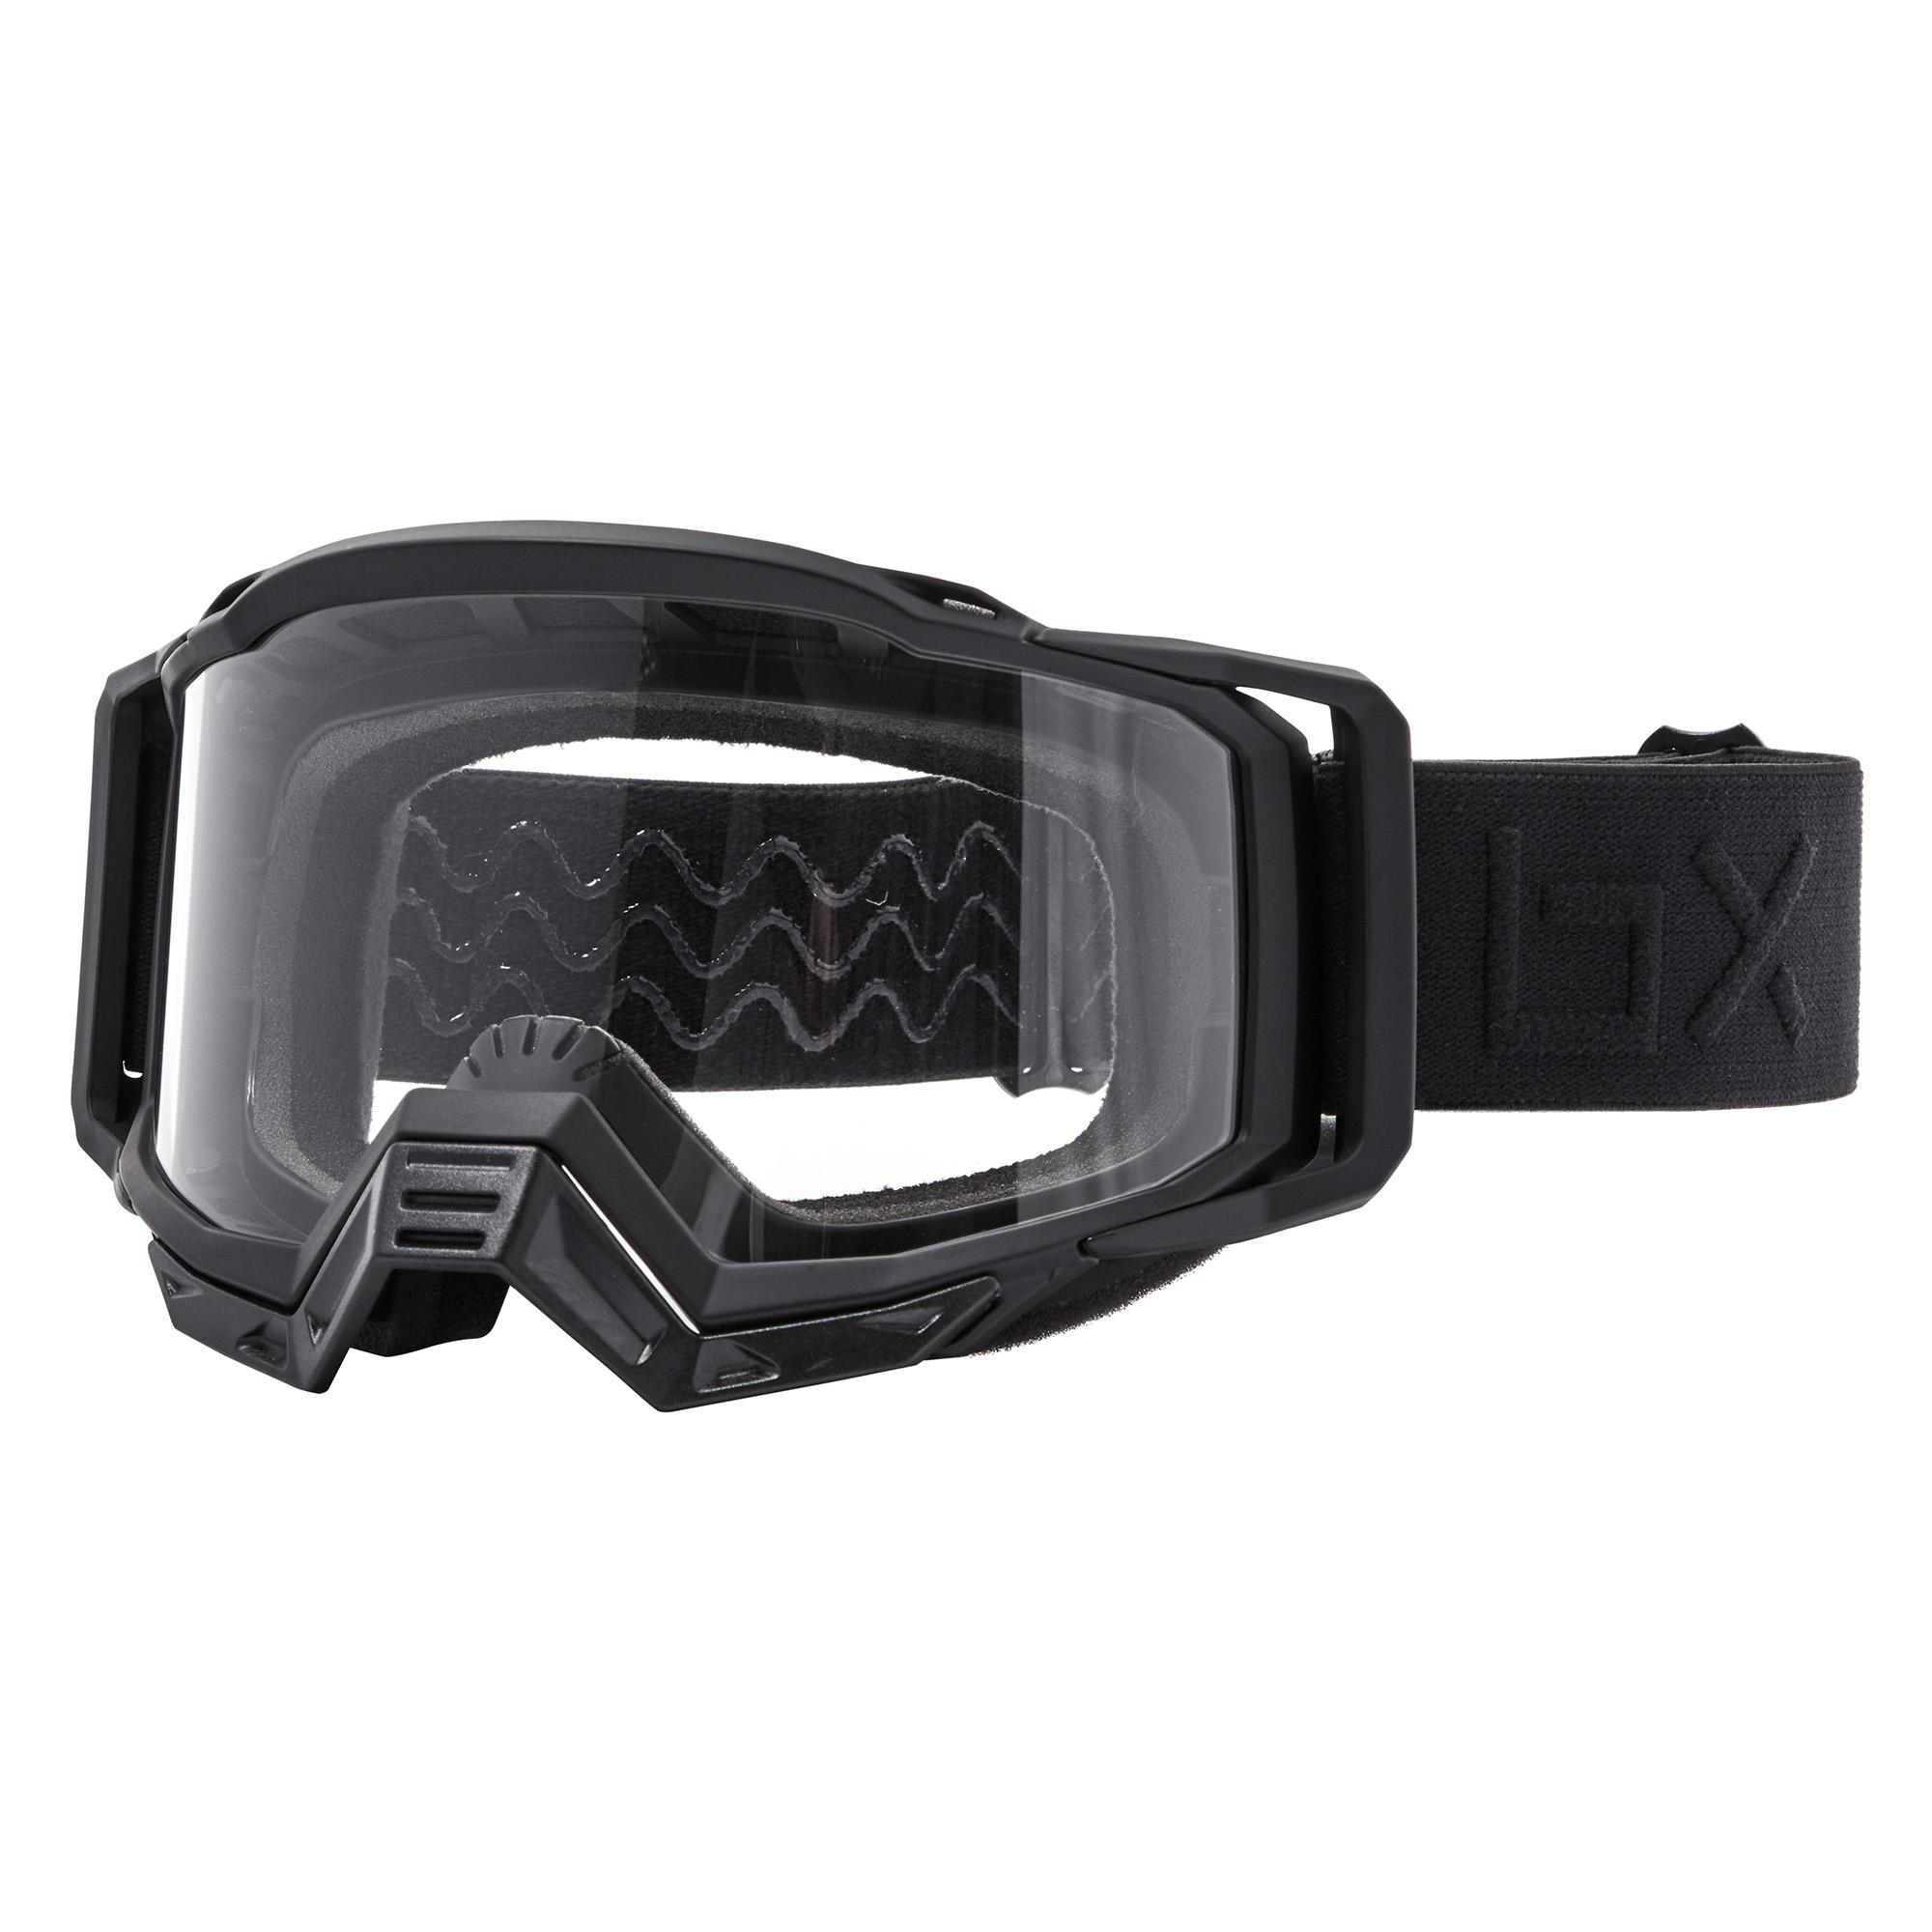 Brand-x G-1 Outrigger Goggles - Black